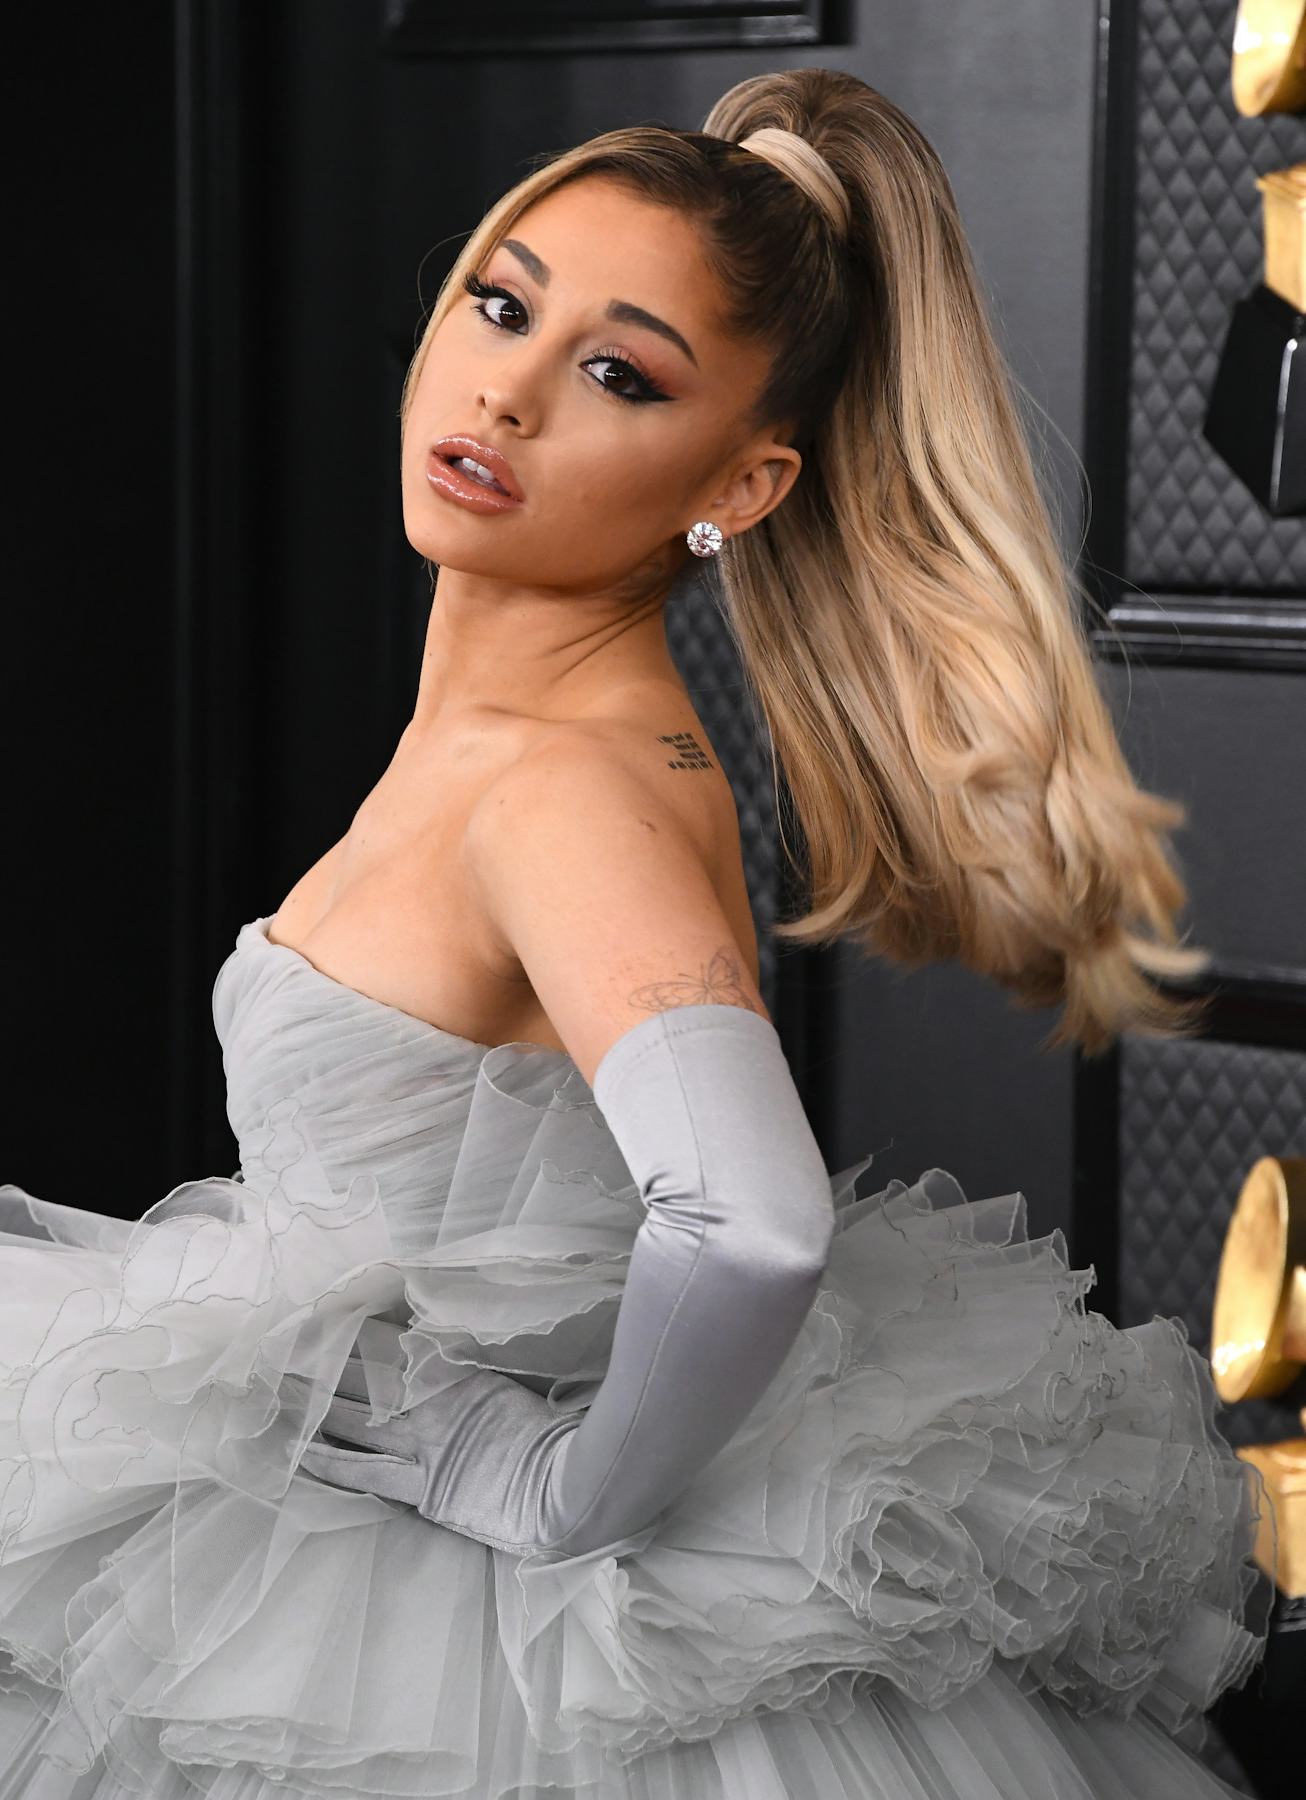 Ariana Grande reportedly wed her fiancé, Dalton Gomez, this weekend,